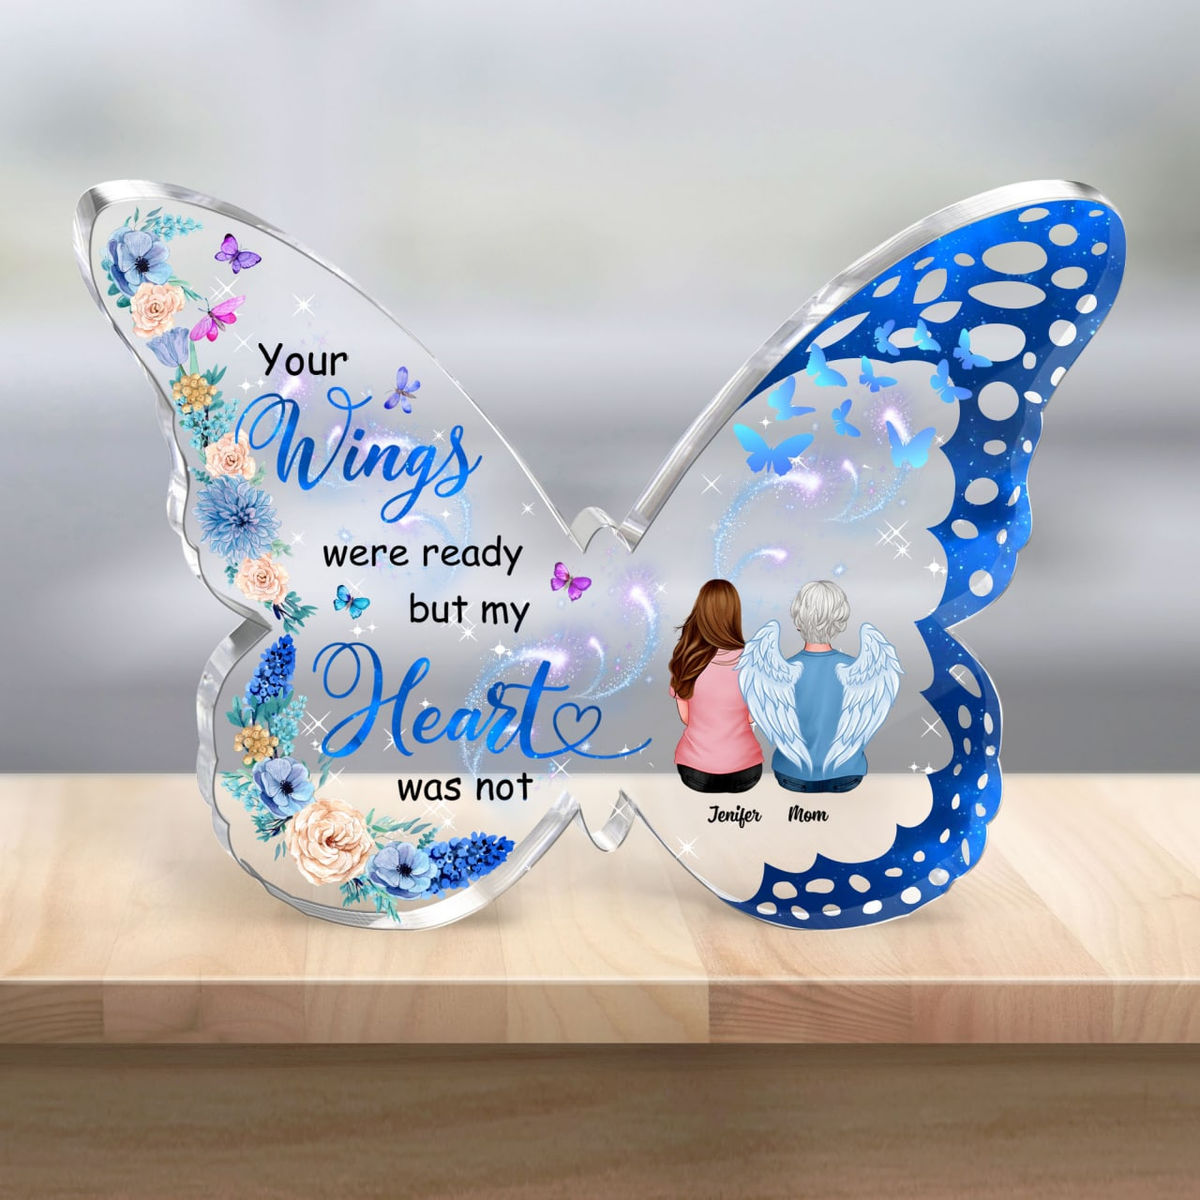 Memorial Family - Your wings were ready but my heart was not (Custom Butterfly-Shaped Acrylic Keepsake)